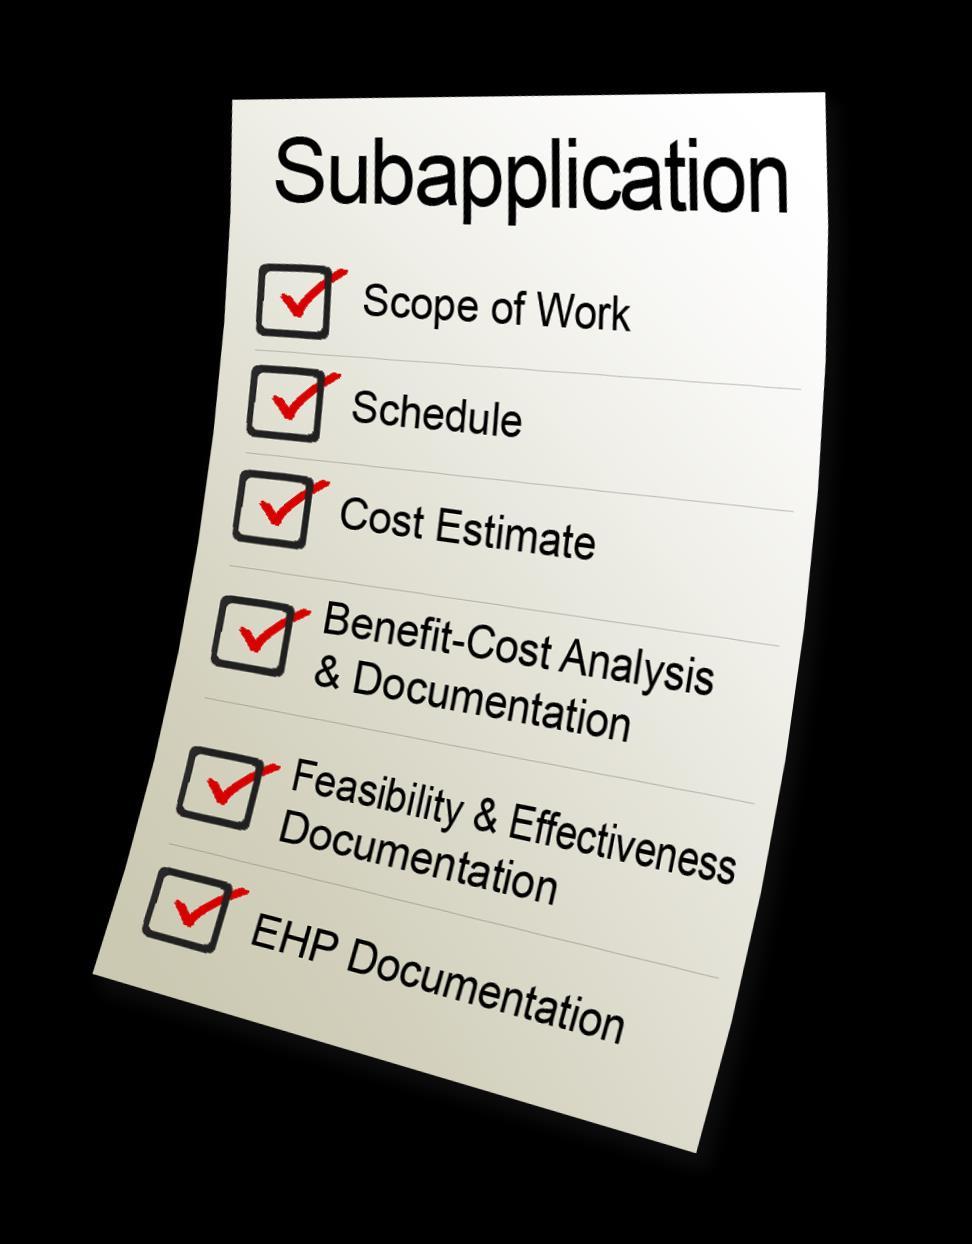 Subapplication Contents Scope of Work Schedule Cost